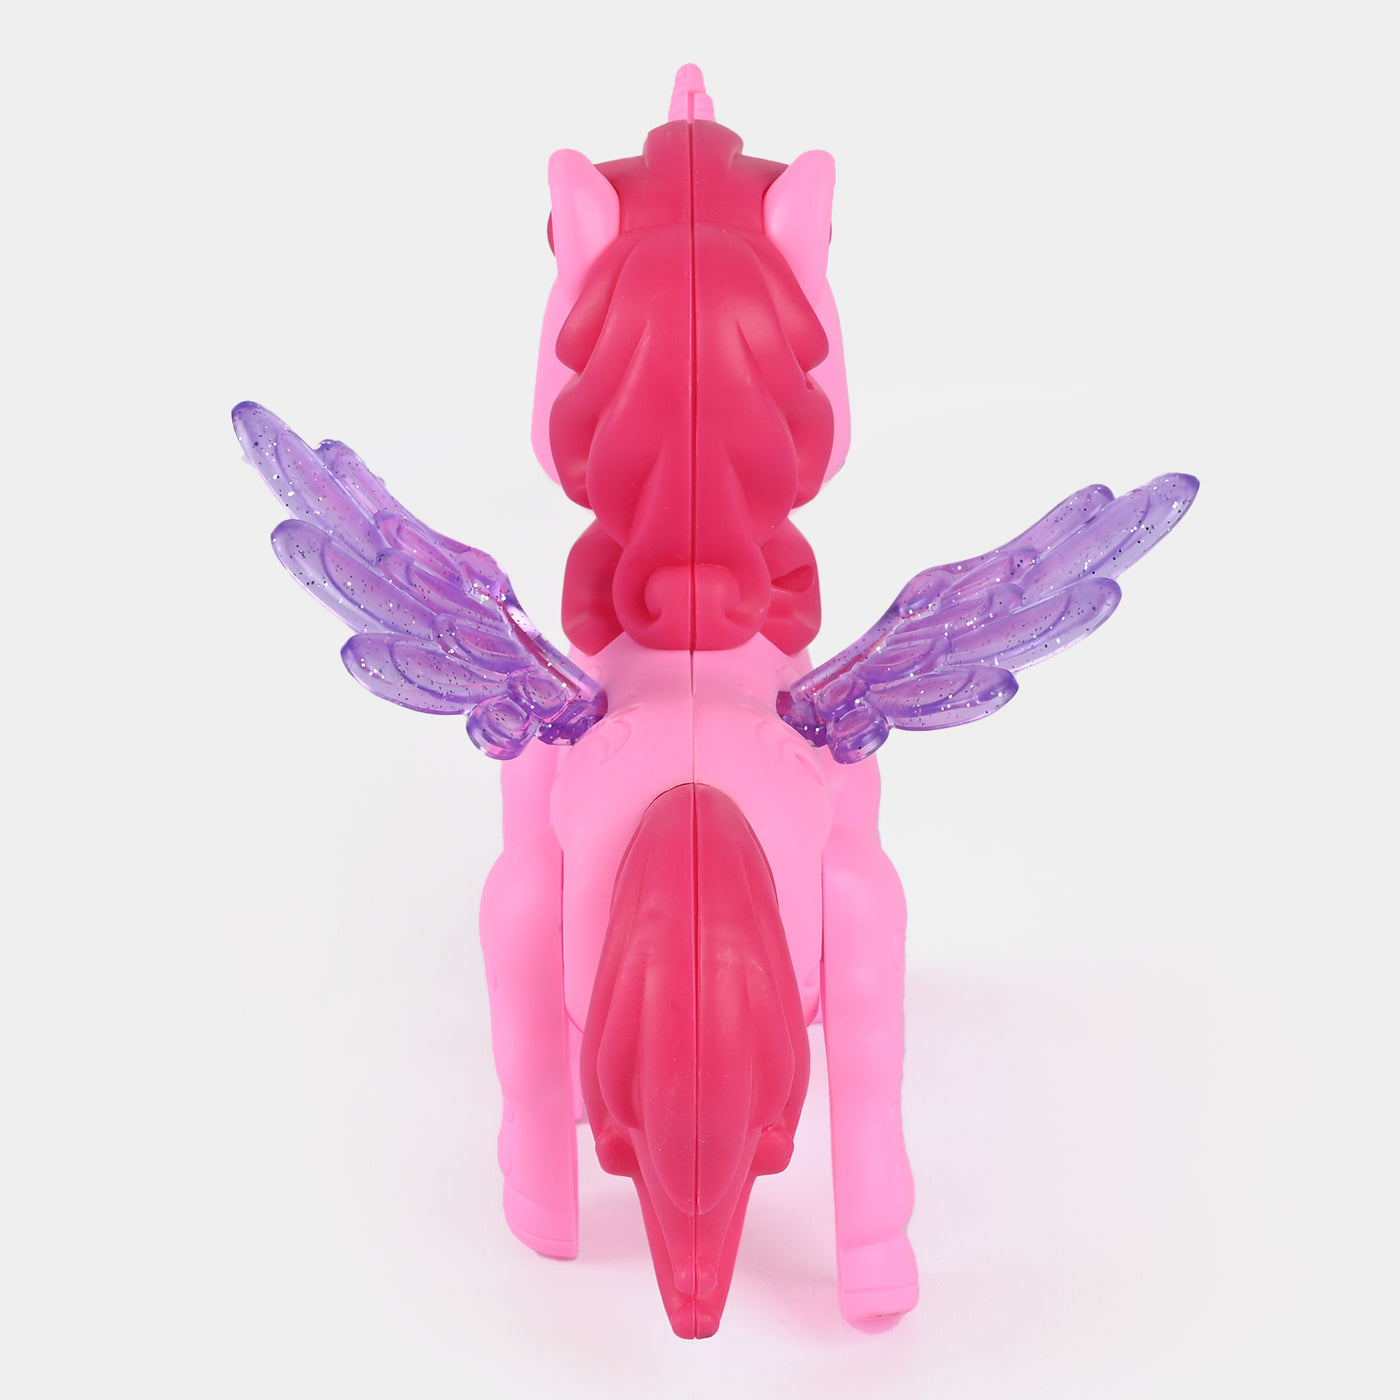 Walking Pony Horse Light/Sound Toy For Kids